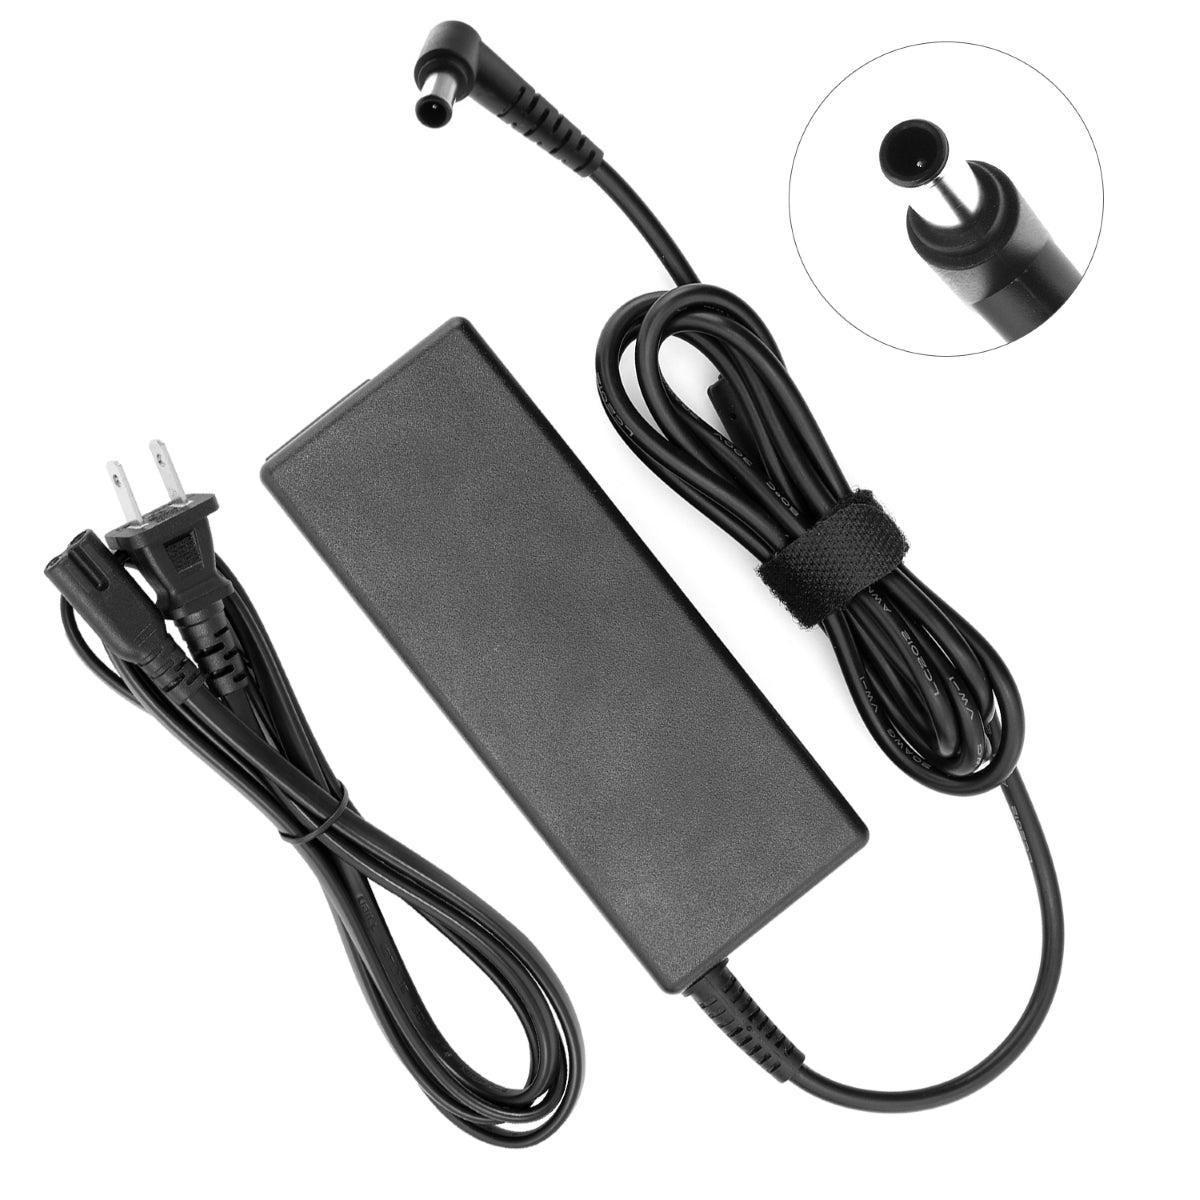 Compatible Charger for Sony Vaio VGN-FZ140E